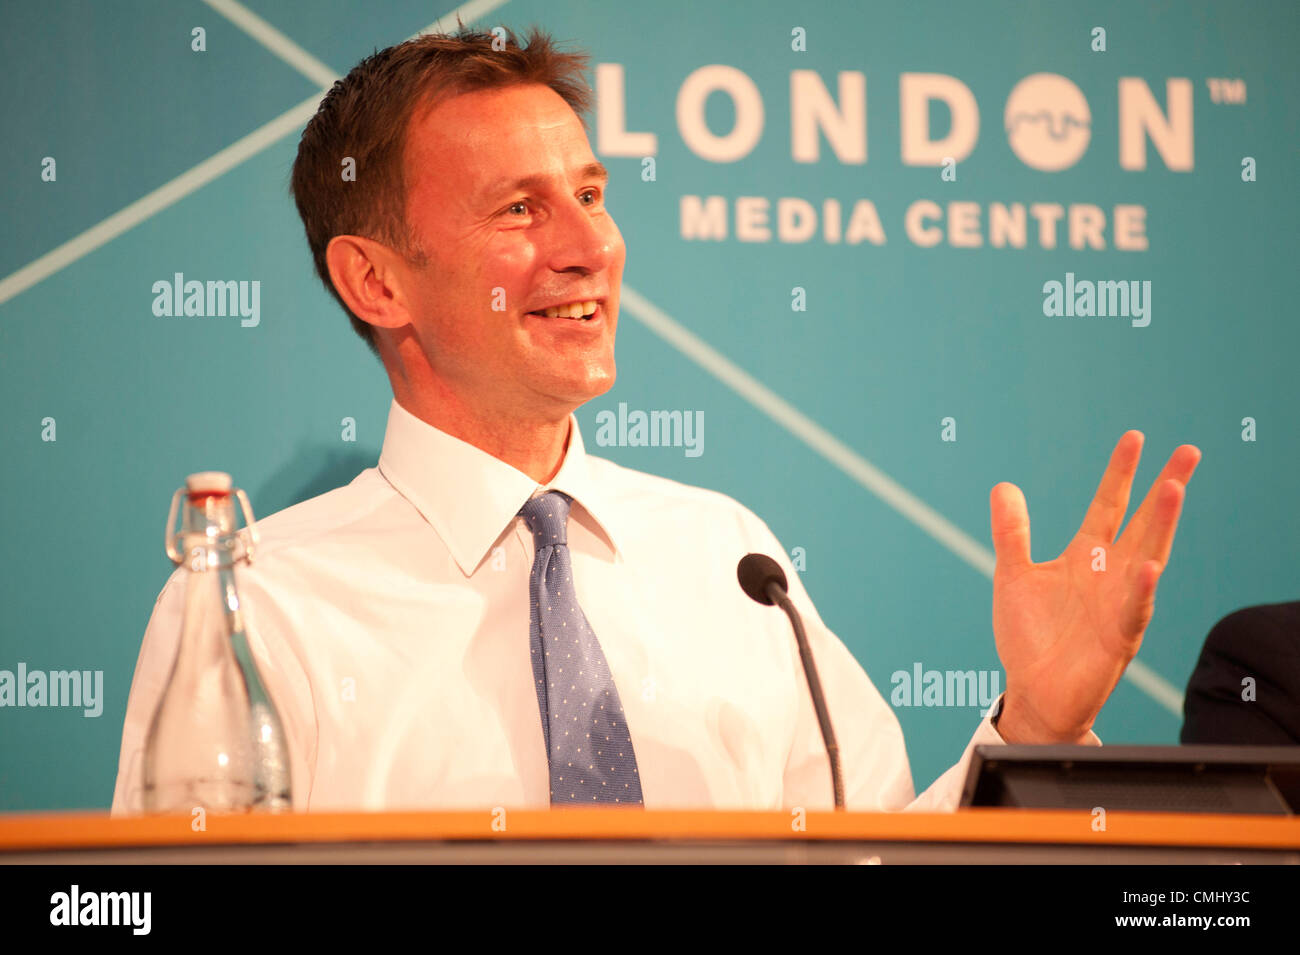 London, UK – 13 August 2012: Culture Secretary, Jeremy Hunt speaks during the final press conference of the Olympic Games to discuss the success of London 2012. Credit:  pcruciatti / Alamy Live News Stock Photo